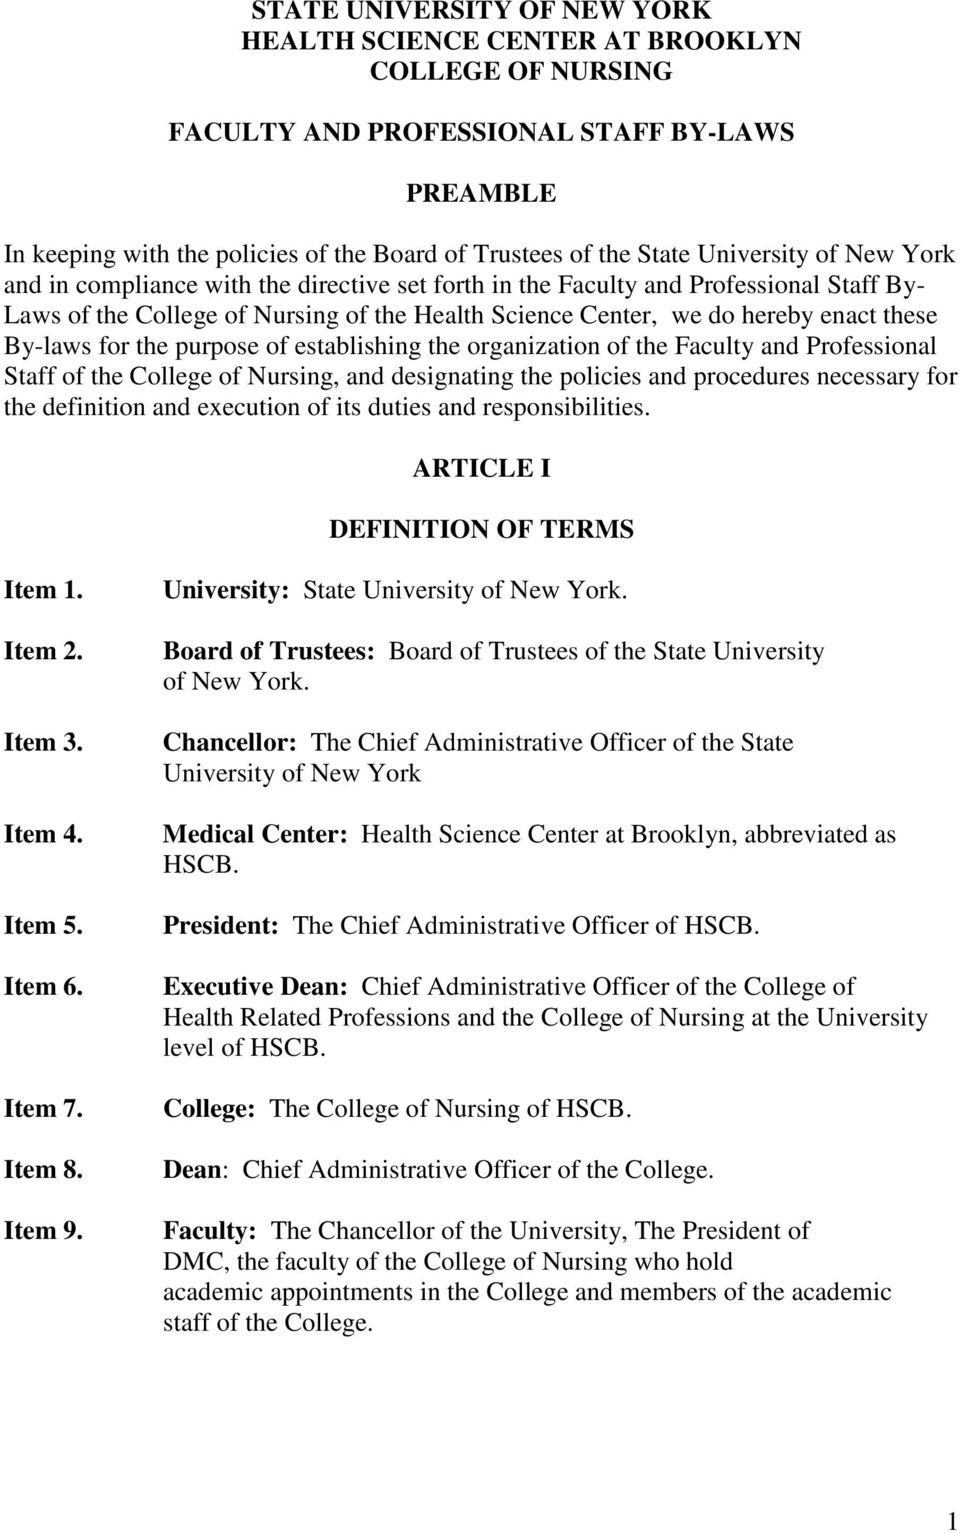 By-laws for the purpose of establishing the organization of the Faculty and Professional Staff of the College of Nursing, and designating the policies and procedures necessary for the definition and